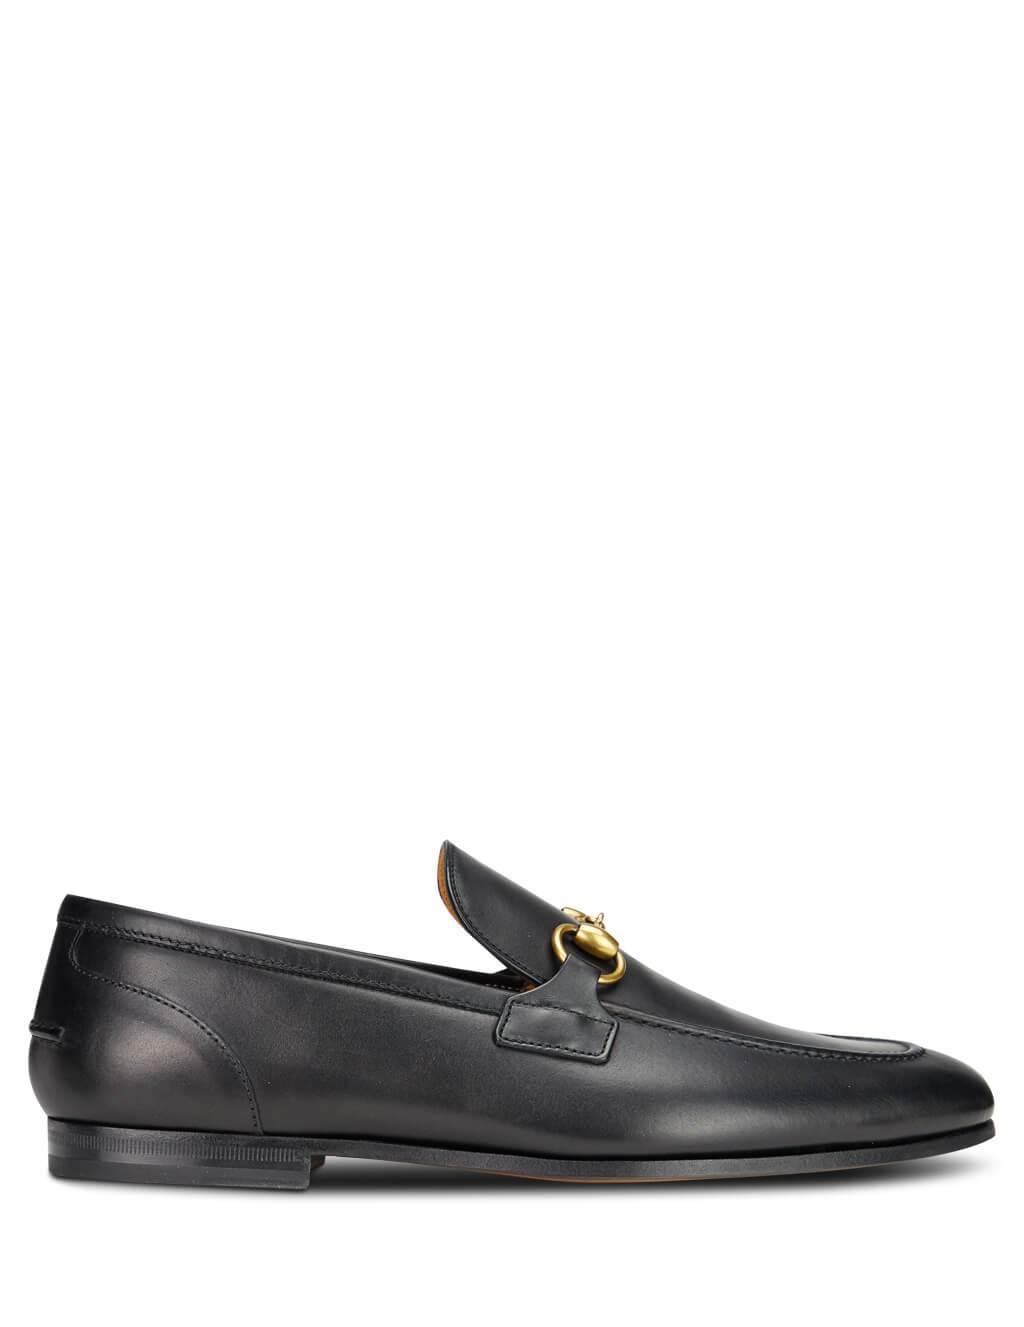 Gucci Jordaan Leather Loafers for Men - Save 37% - Lyst